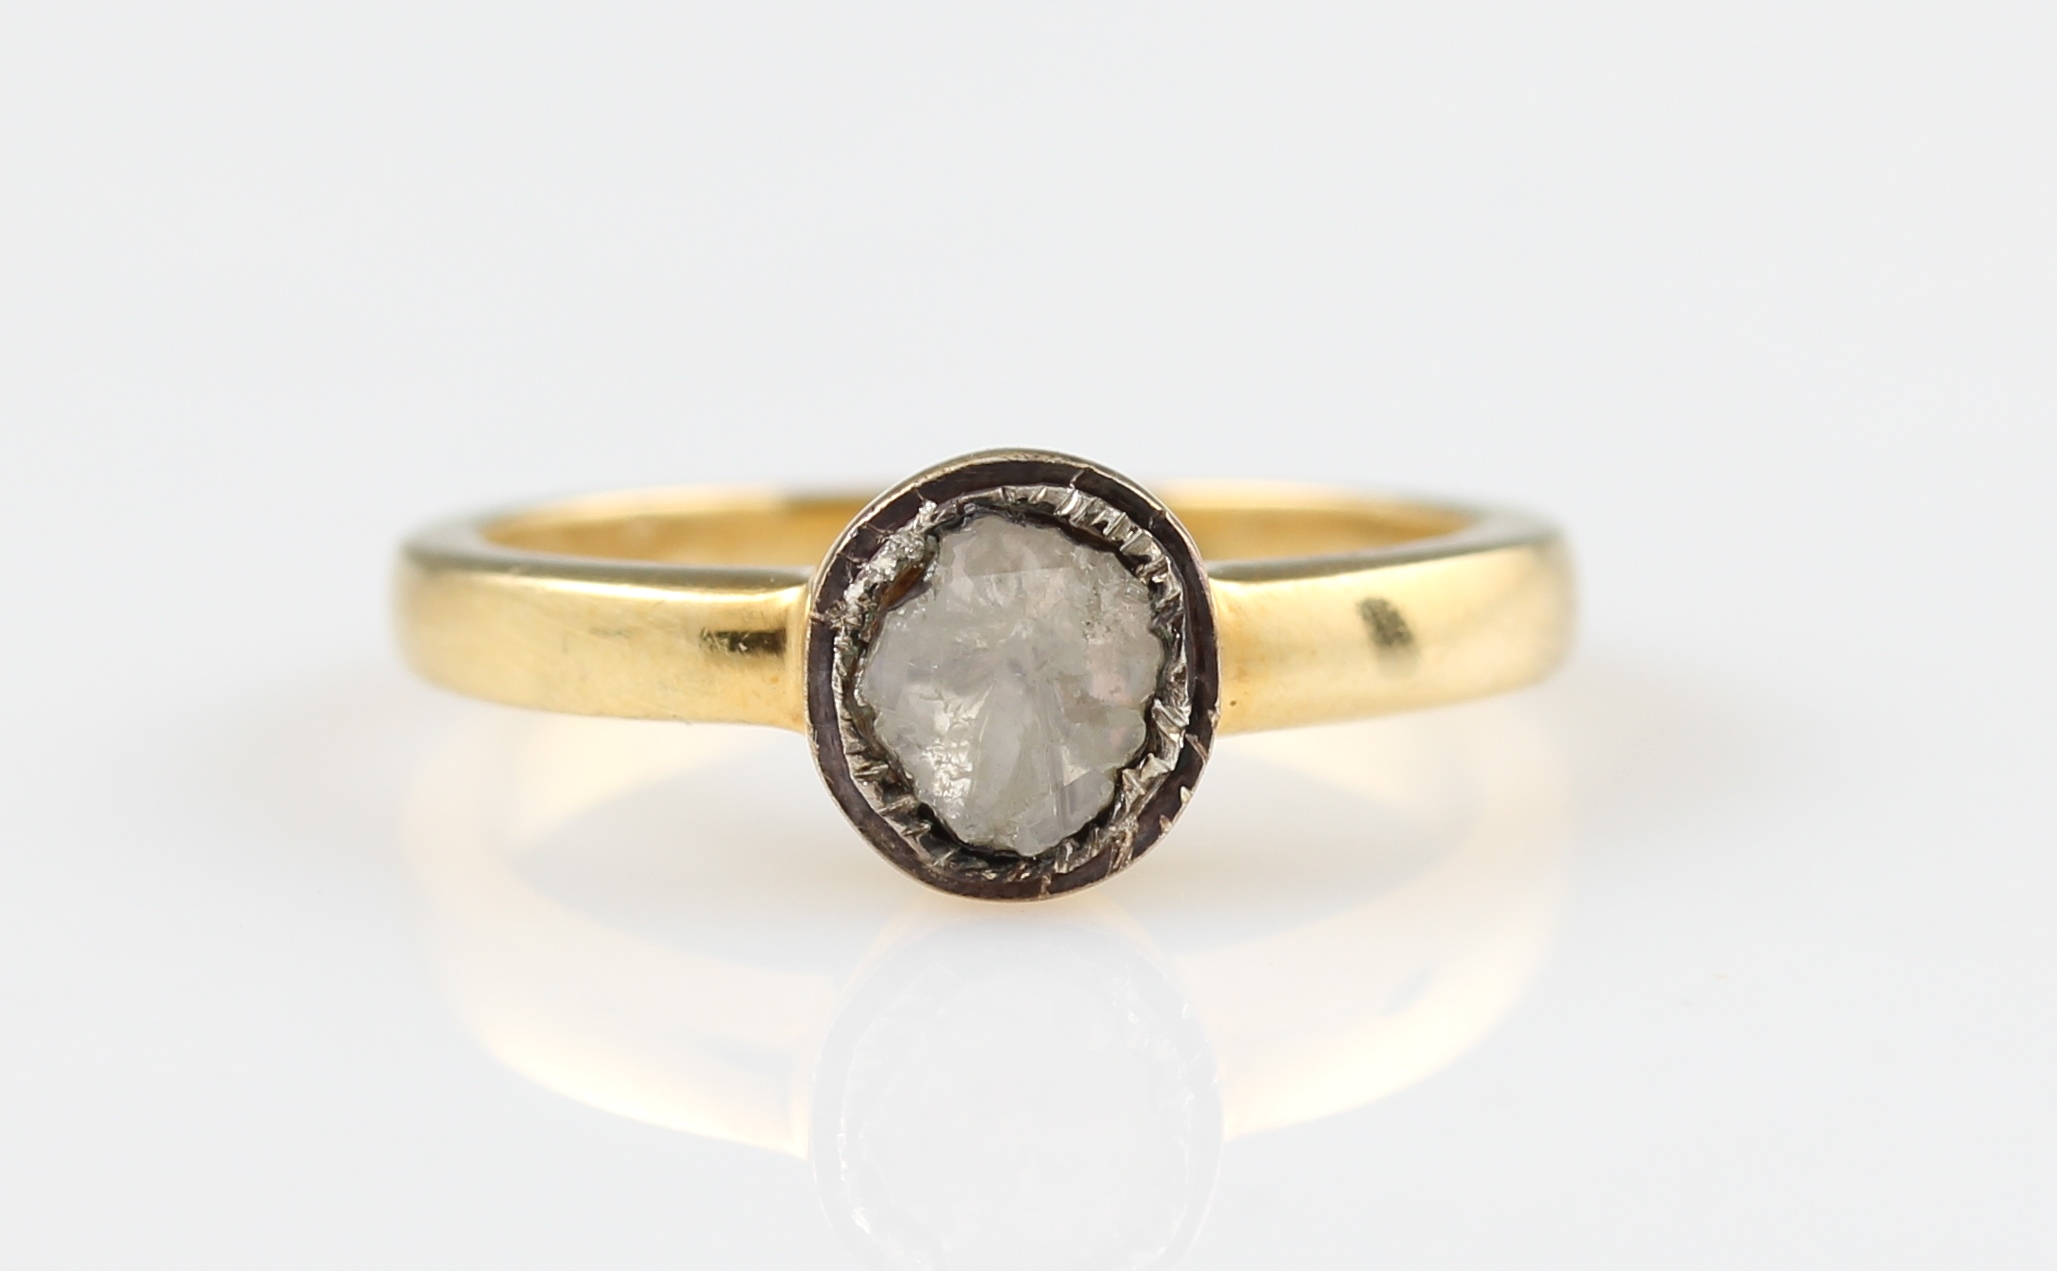 A diamond ring, set with a foil backed flat cut diamond, in unmarked yellow metal, ring size L½.